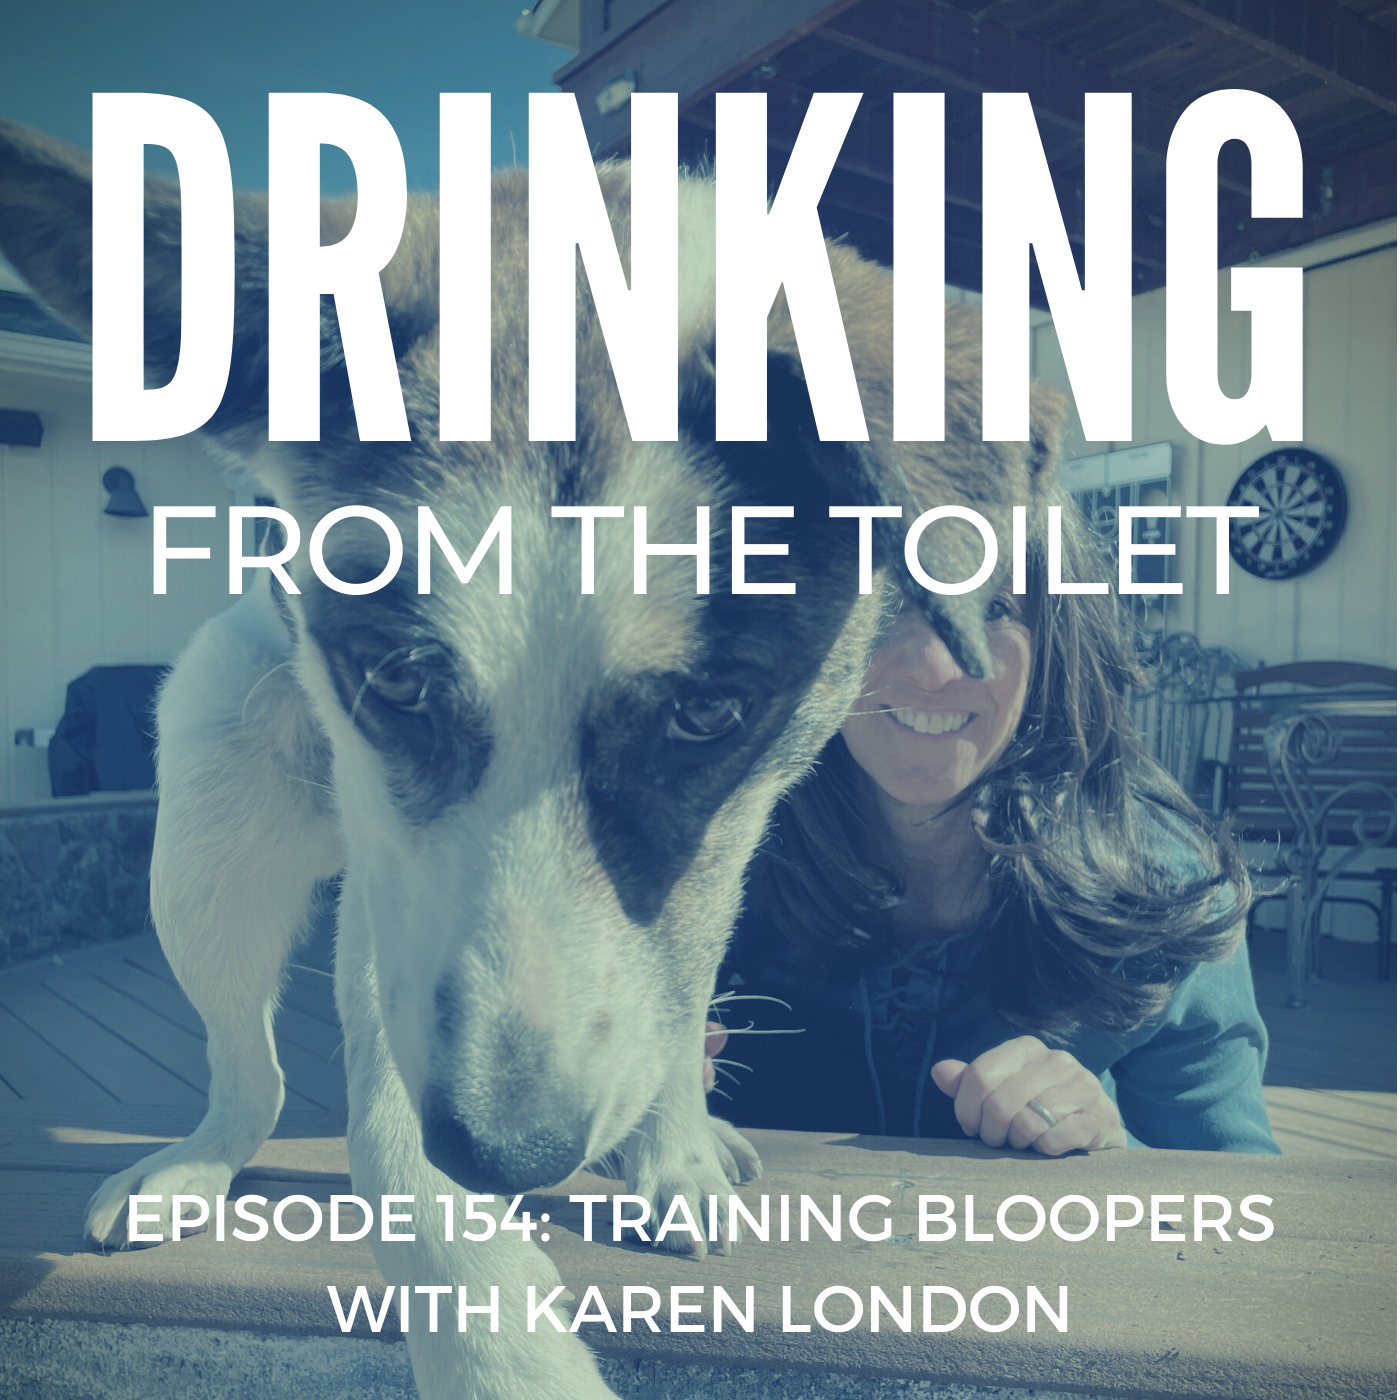 Podcast #154: Training Bloopers with Karen London